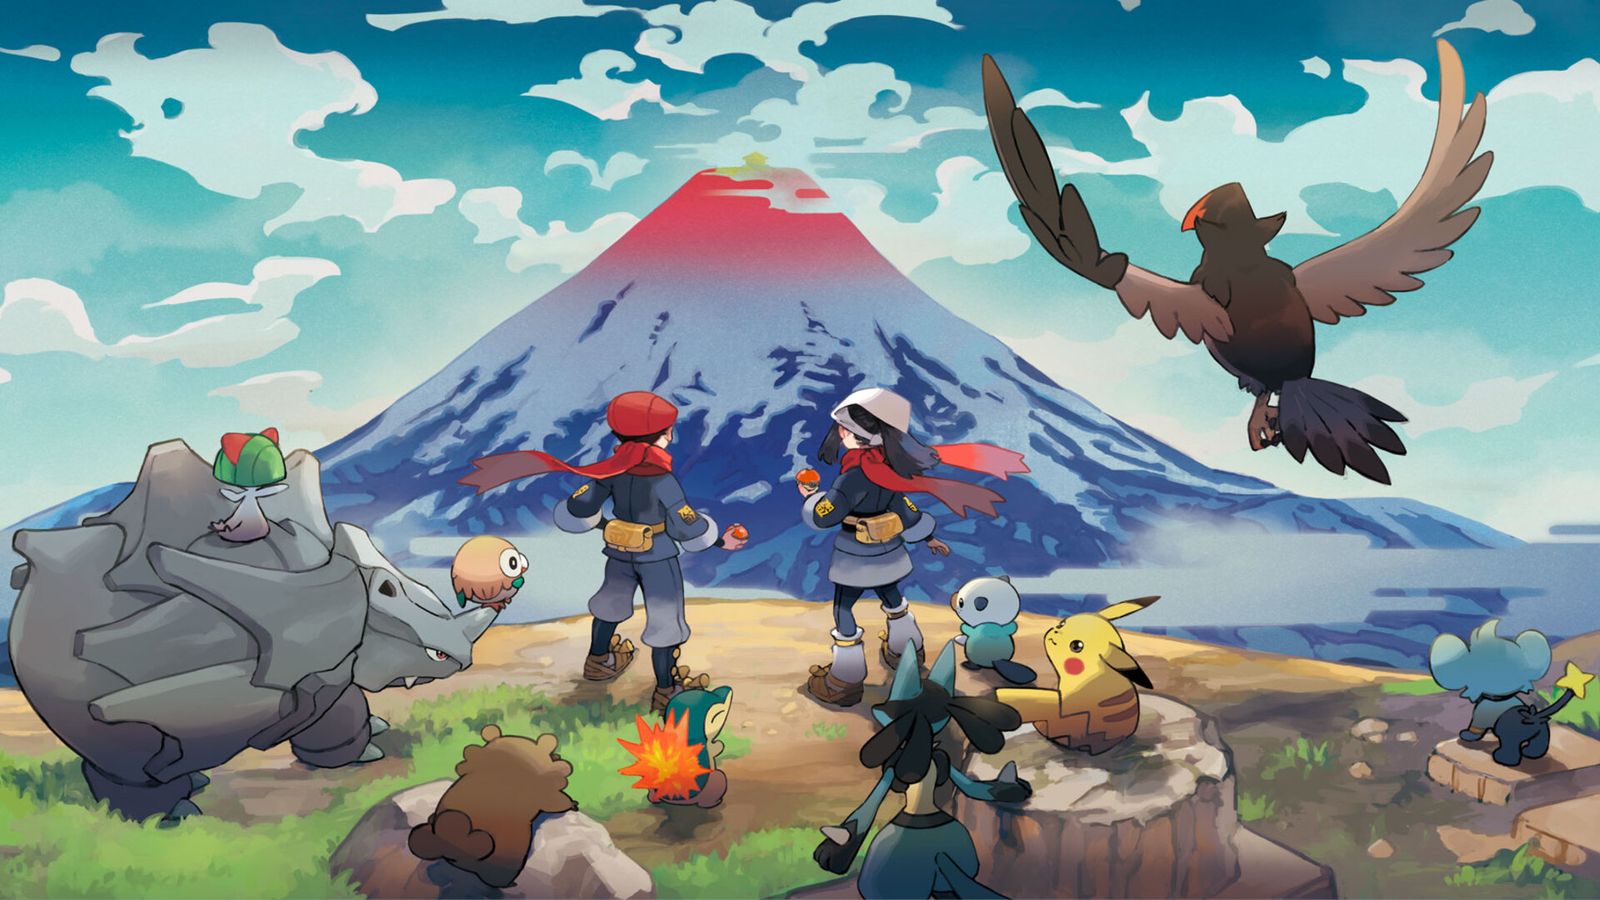 Cover art for Pokemon Legends Arceus, featuring a group of pokemon and trainers looking at a volcano.